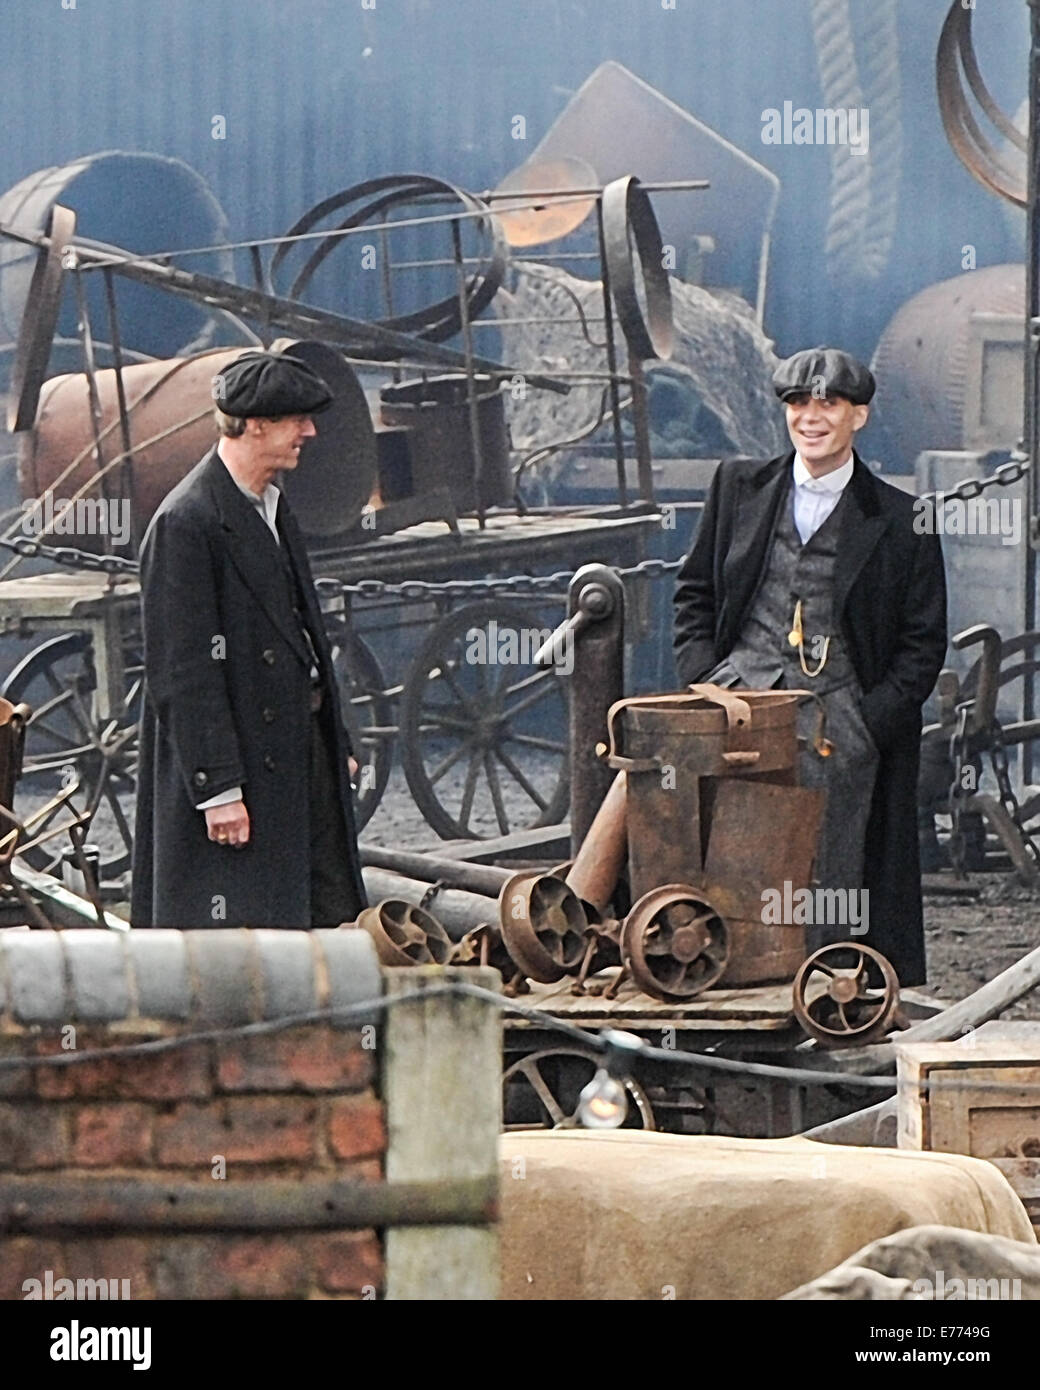 Cillian Murphy films scenes for the second series of crime drama 'Peaky Blinders' on location at the Black Country Museum  Featuring: Cillian Murphy Where: Dudley, West Midlands, United Kingdom When: 05 Mar 2014 Stock Photo